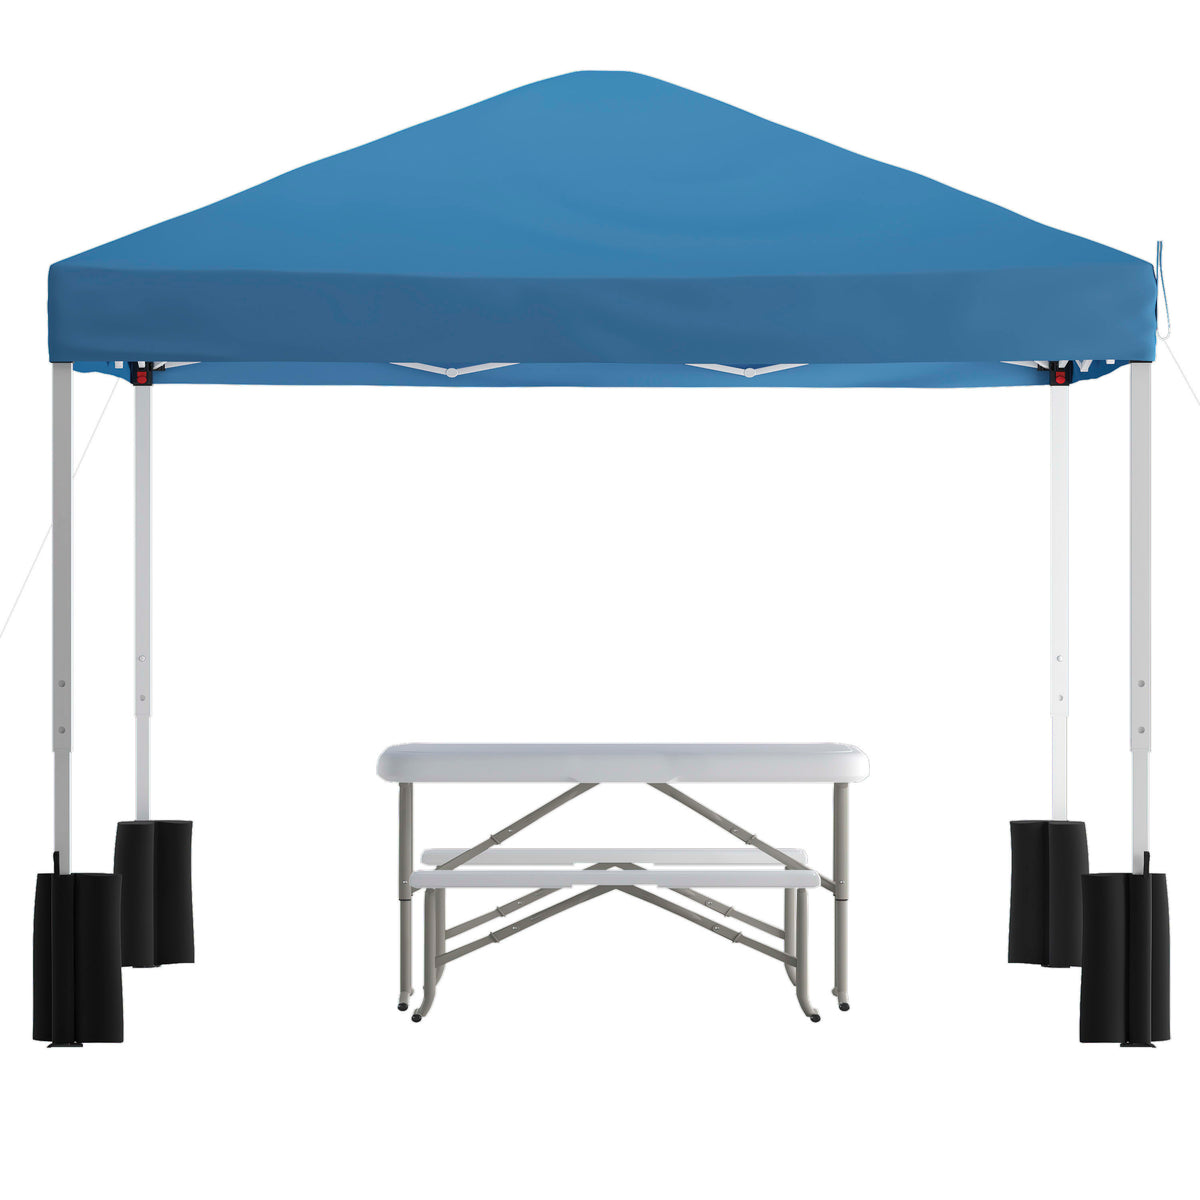 Blue |#| 10' x 10' Blue Pop Up Canopy - Wheeled Case - Folding Table with Benches Set